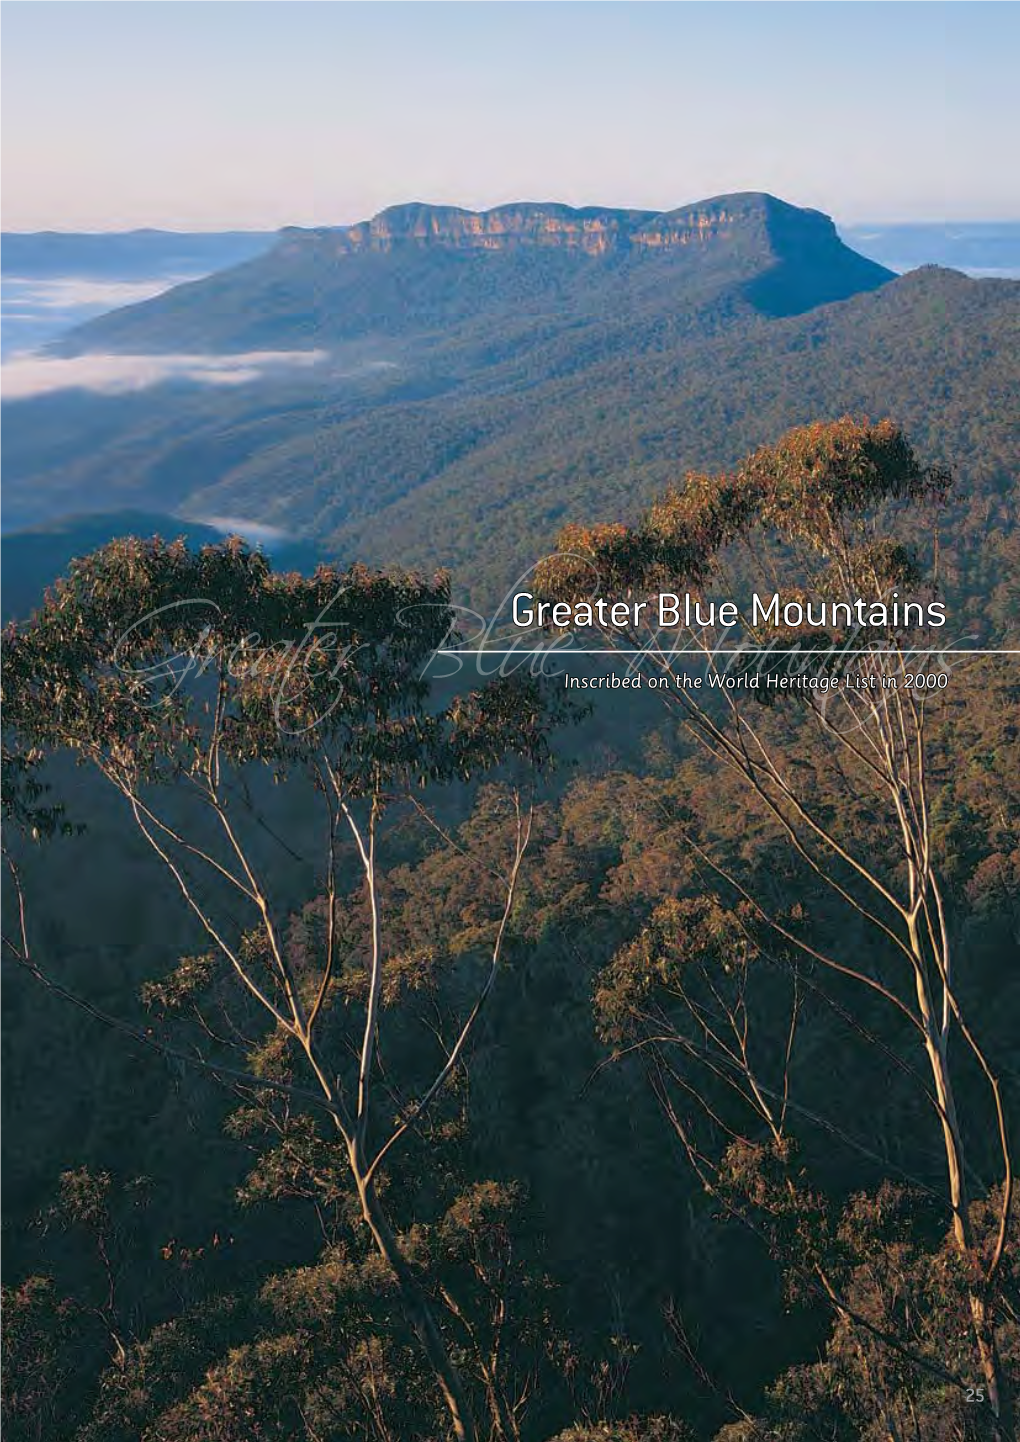 Greater Blue Mountains Greater Blueinscribed Mountains on the World Heritage List in 2000